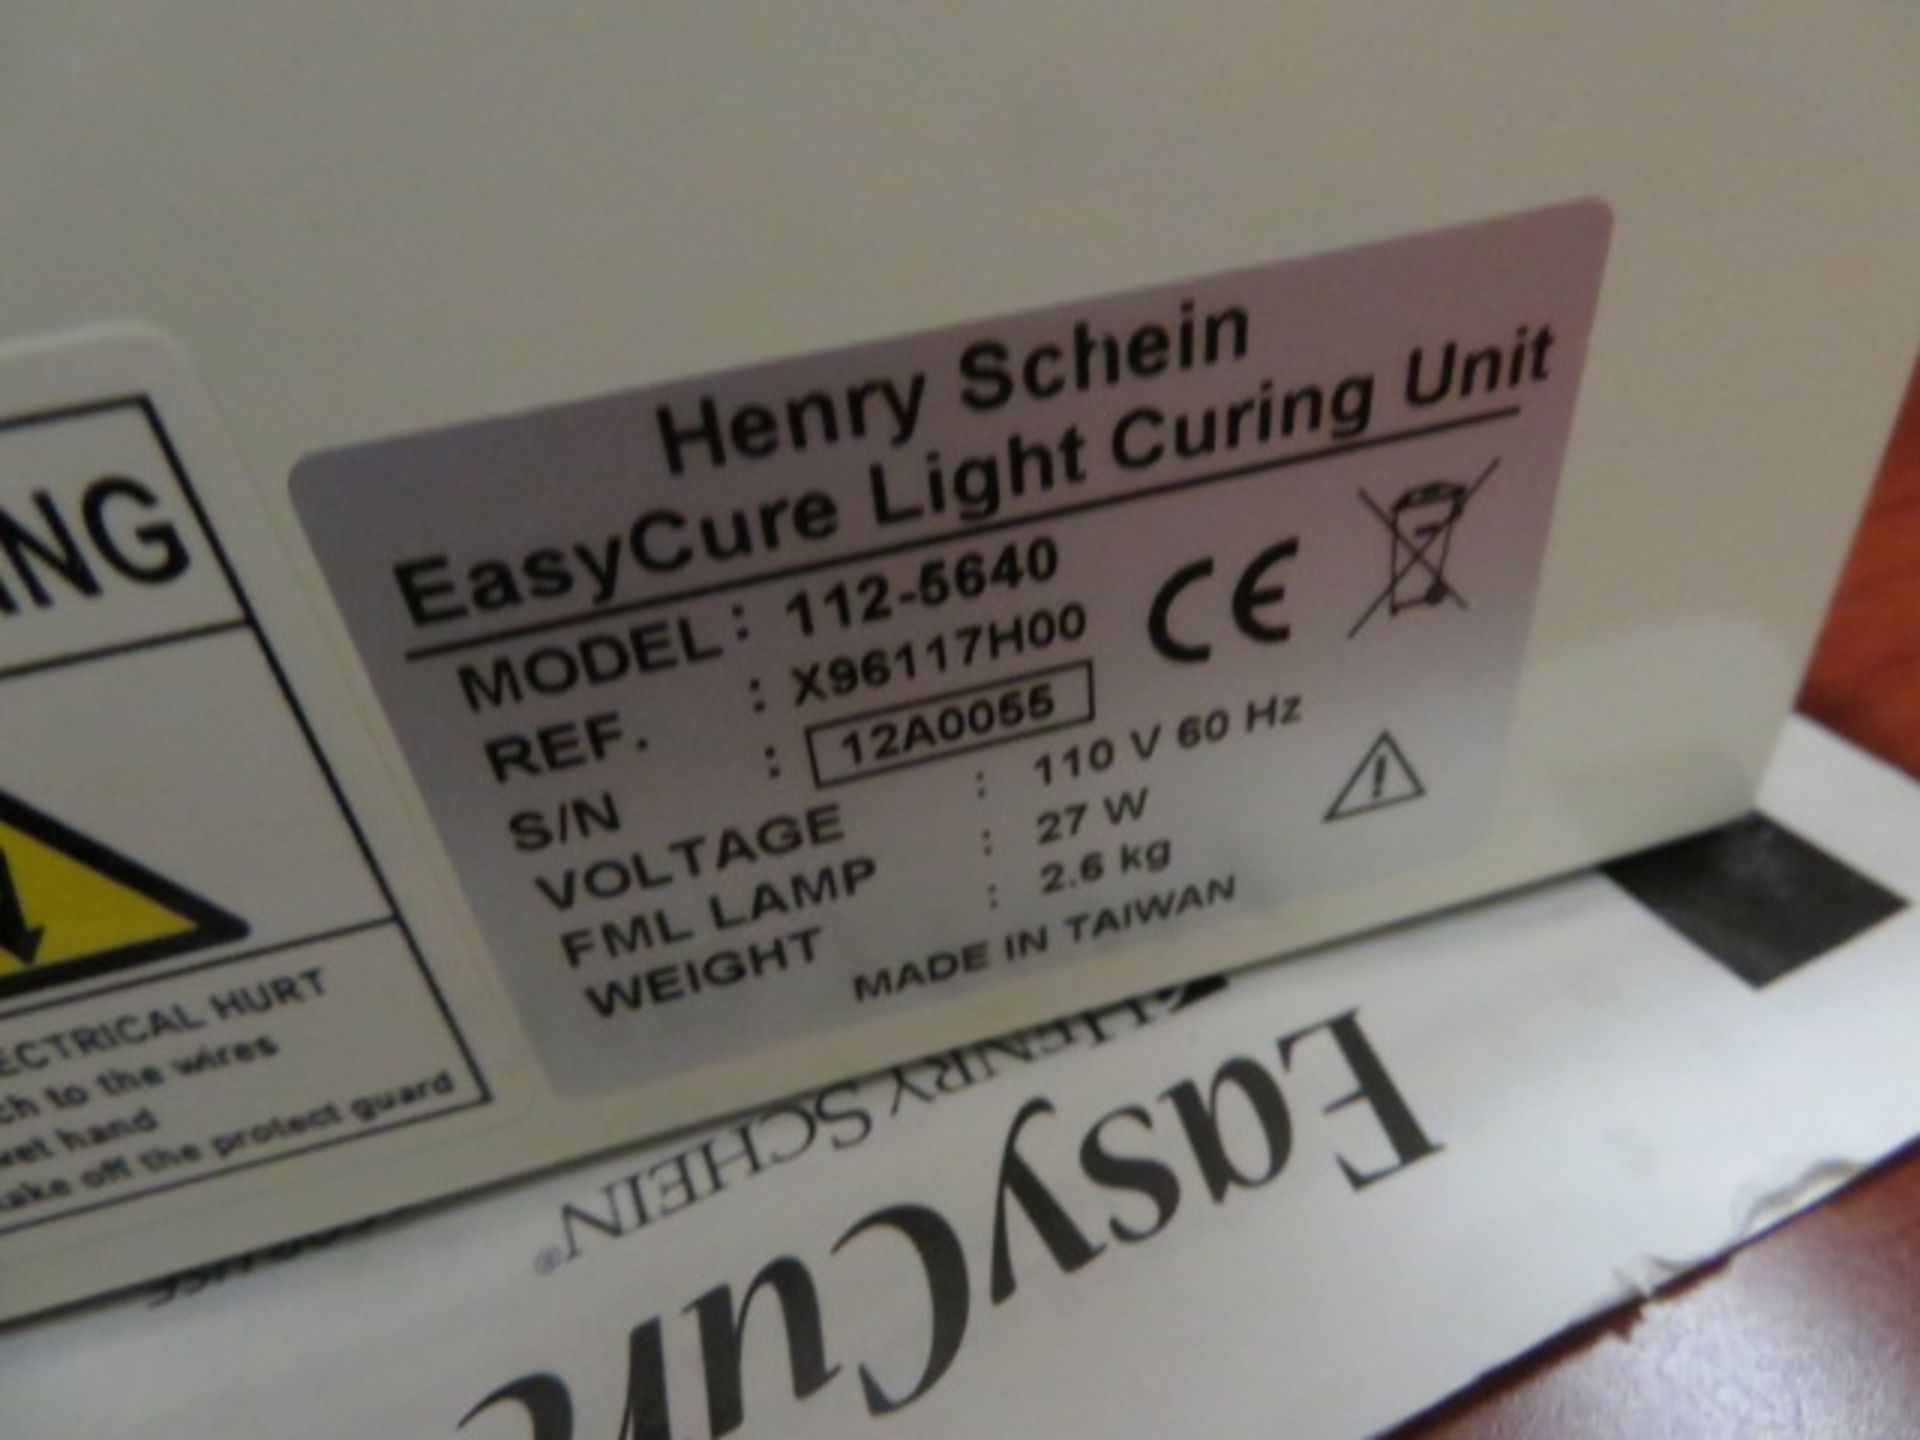 HENRY SCHEIN 112-5640 EASYCURE LIGHT BOX - Image 2 of 2